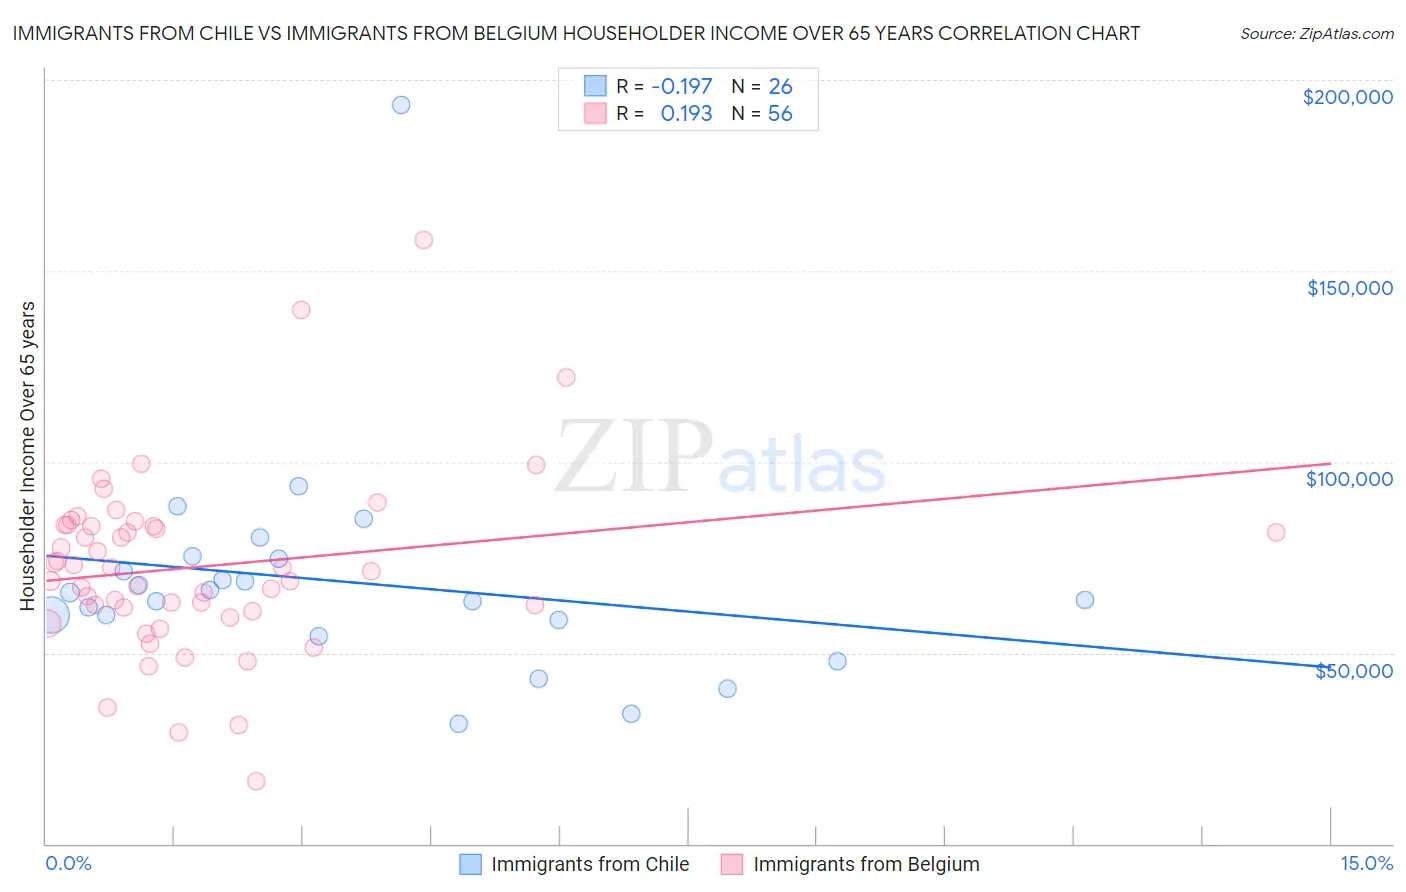 Immigrants from Chile vs Immigrants from Belgium Householder Income Over 65 years